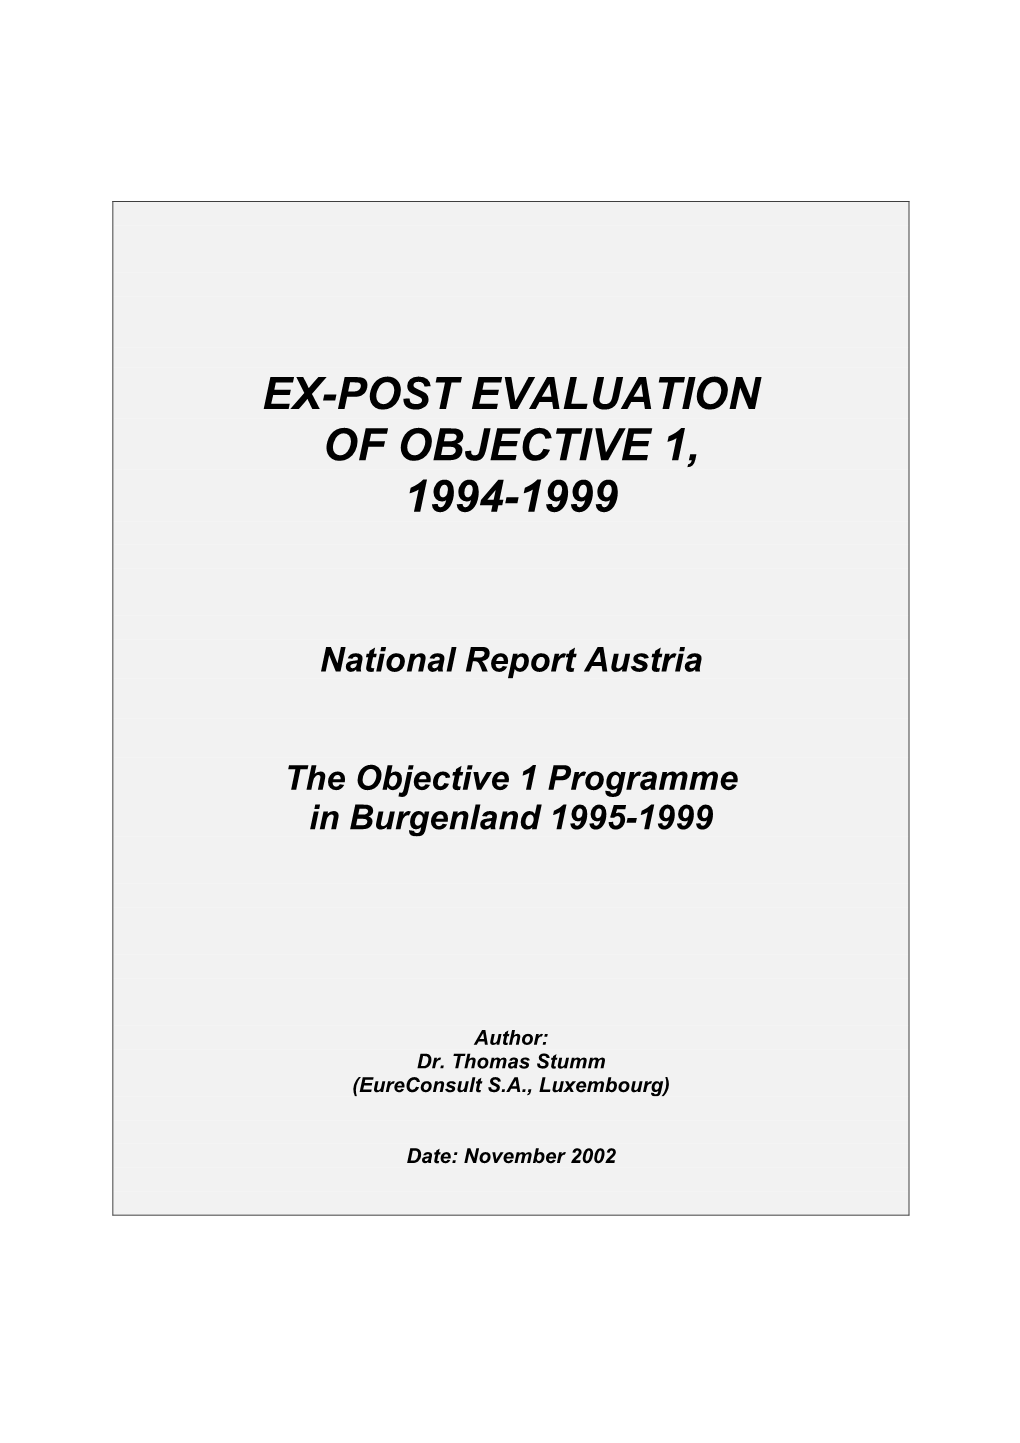 Ex-Post Evaluation of Objective 1, 1994-1999